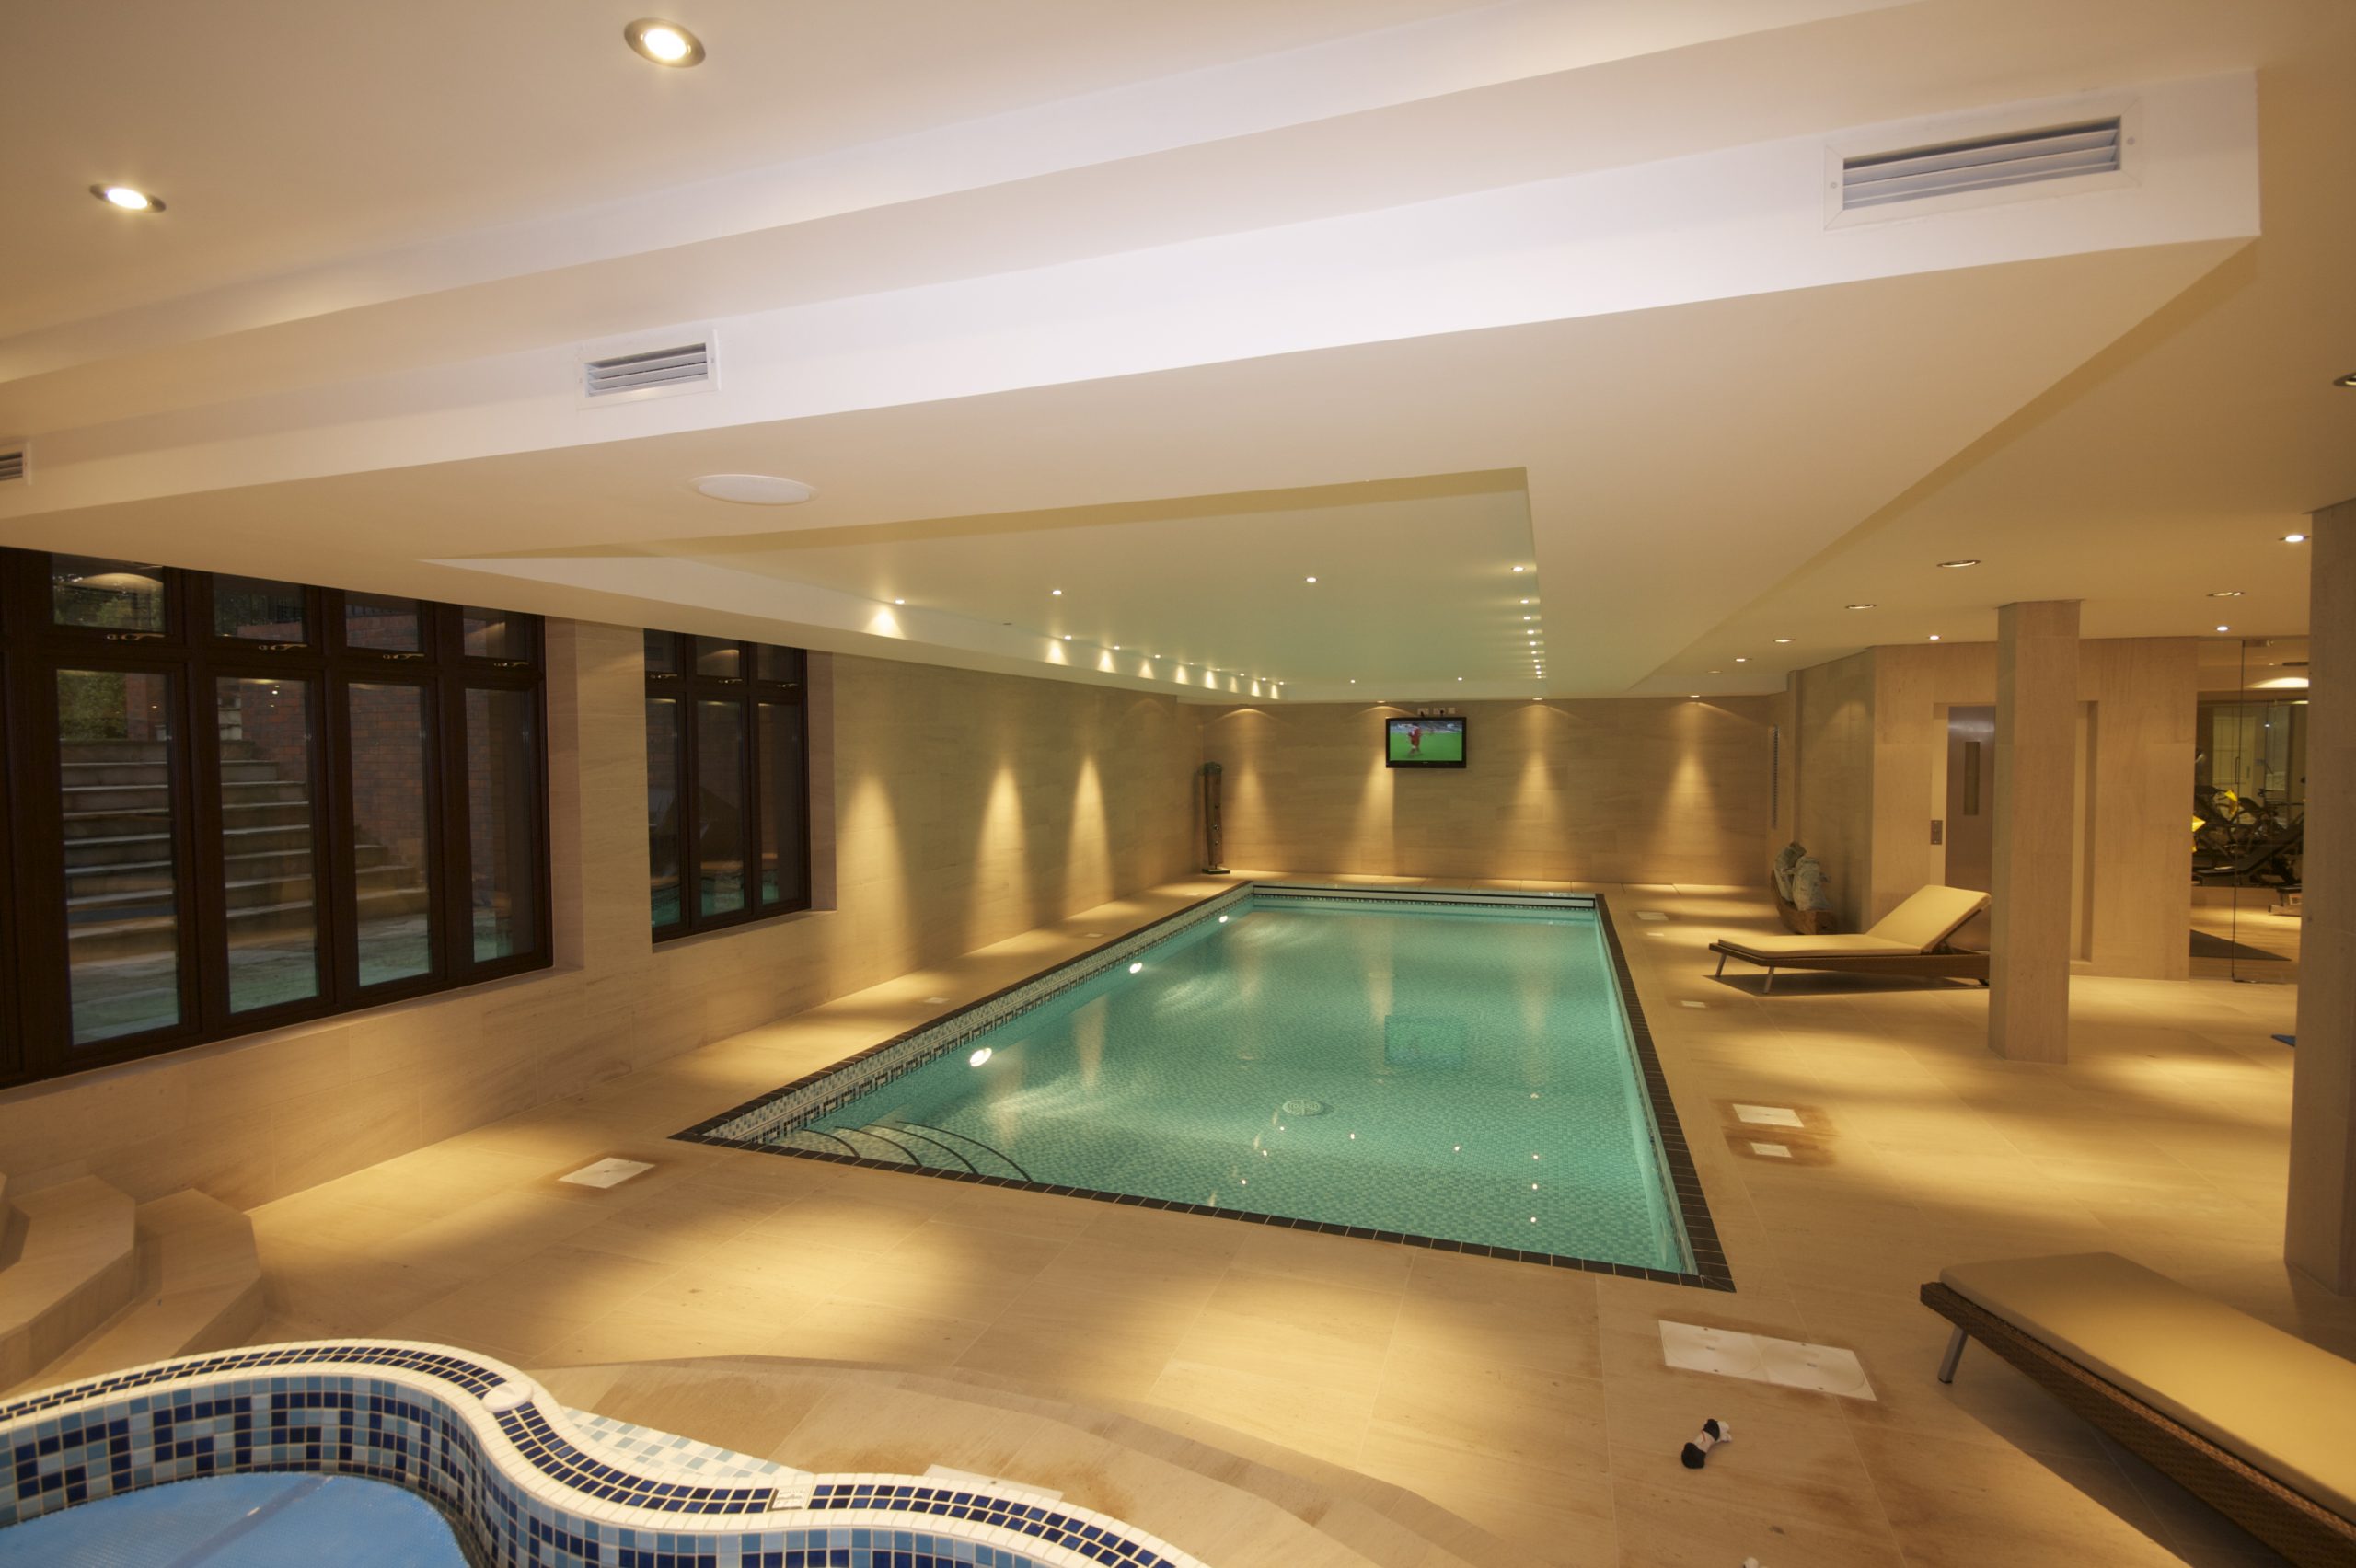 Smart home technology in pool area, shows lighting control, audio system and video distribution.